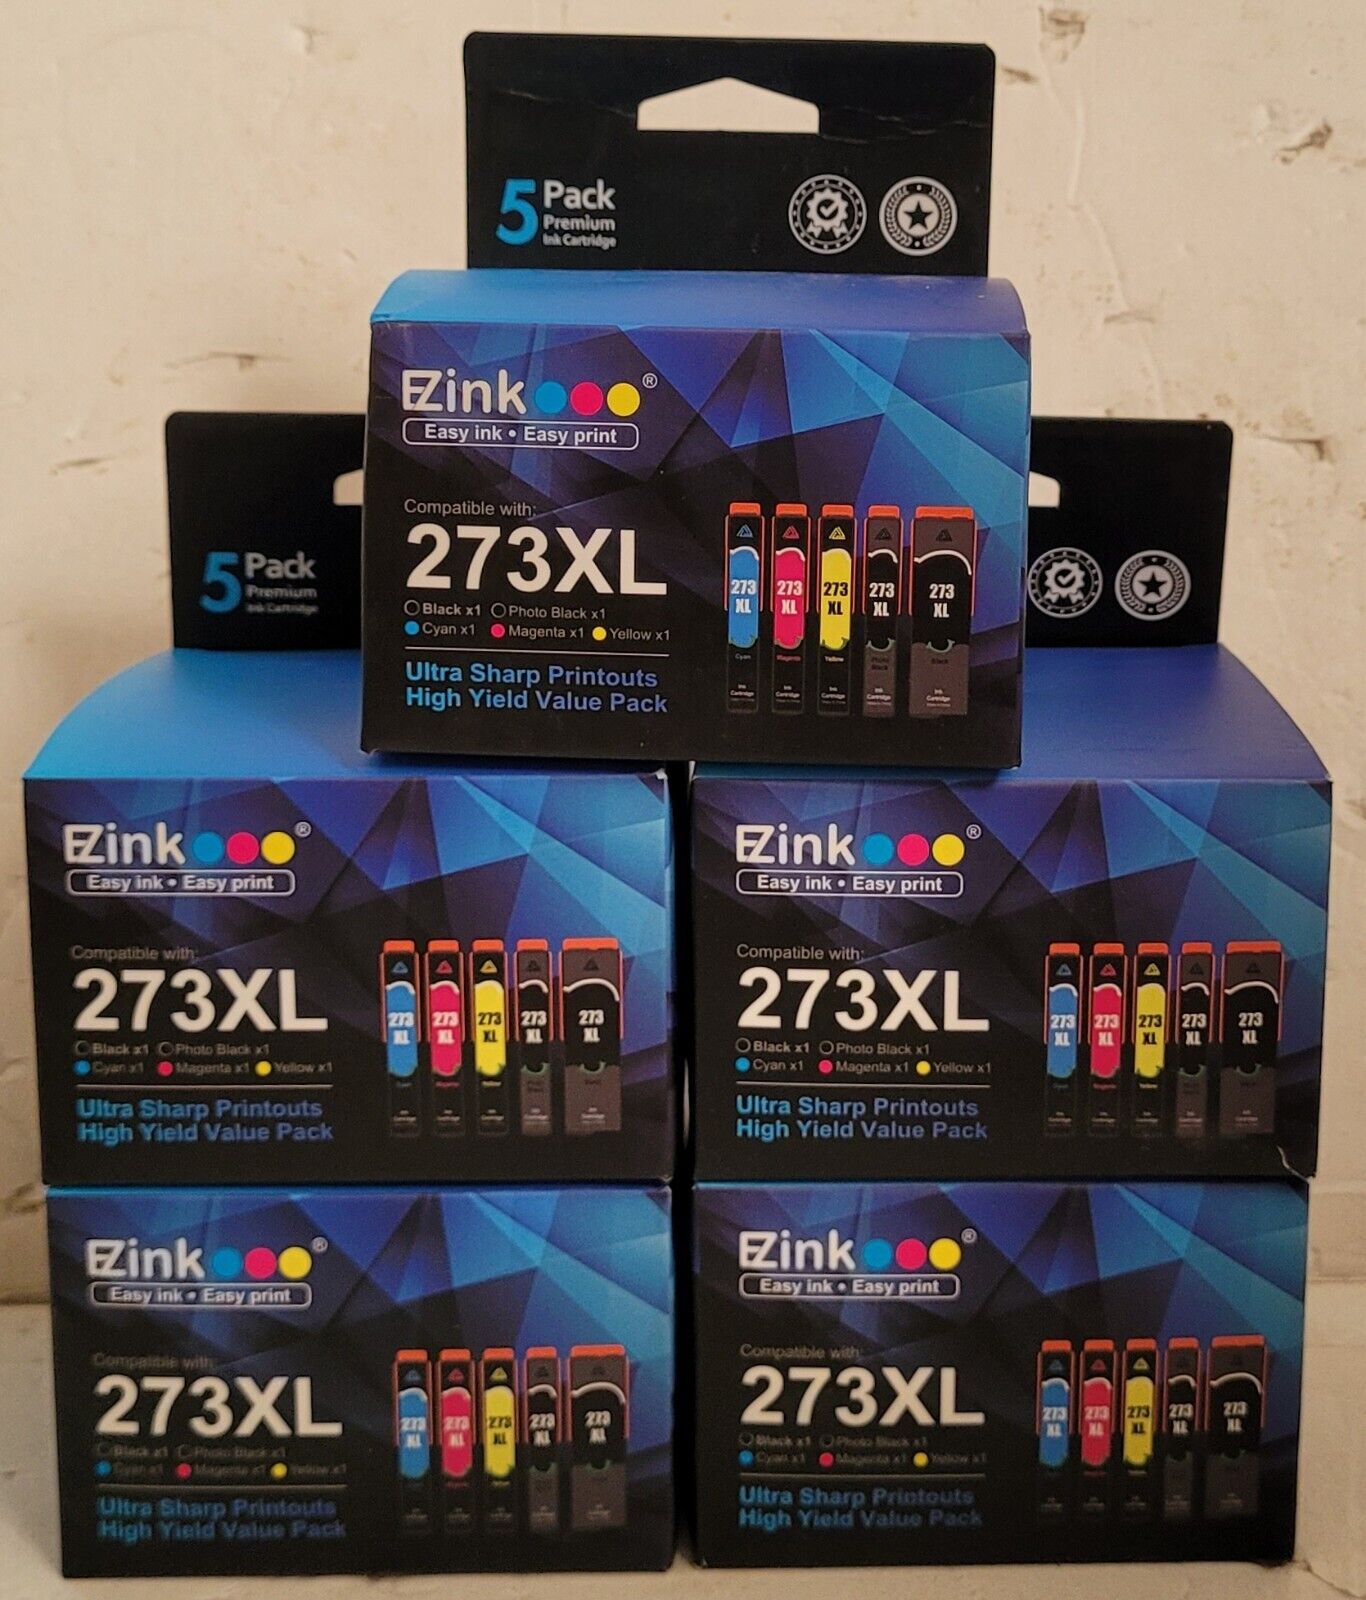 25 Pack E-Z Ink 273 Ink Cartridge Replacement for Epson 273xl, 5 Boxes of 5